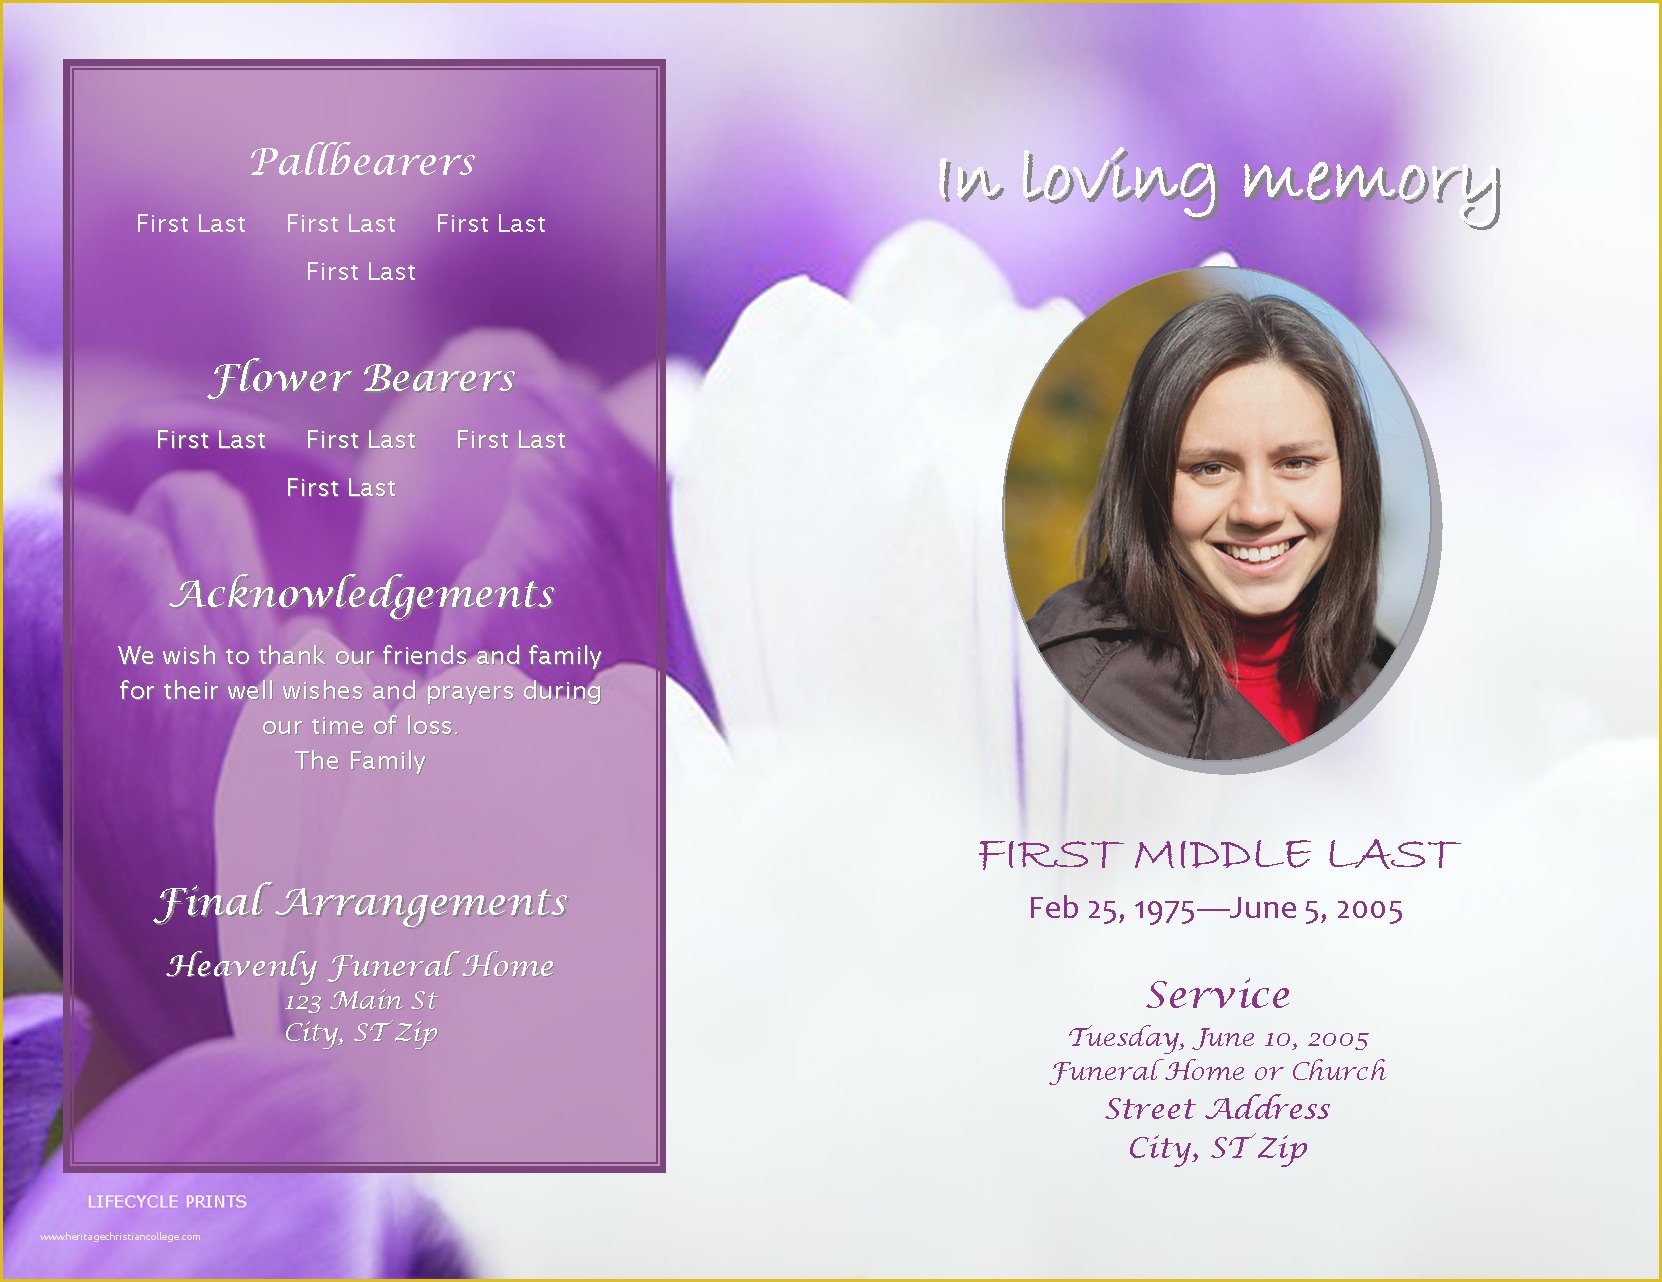 Free Homegoing Service Program Template Of Lifecycleprints Online Store